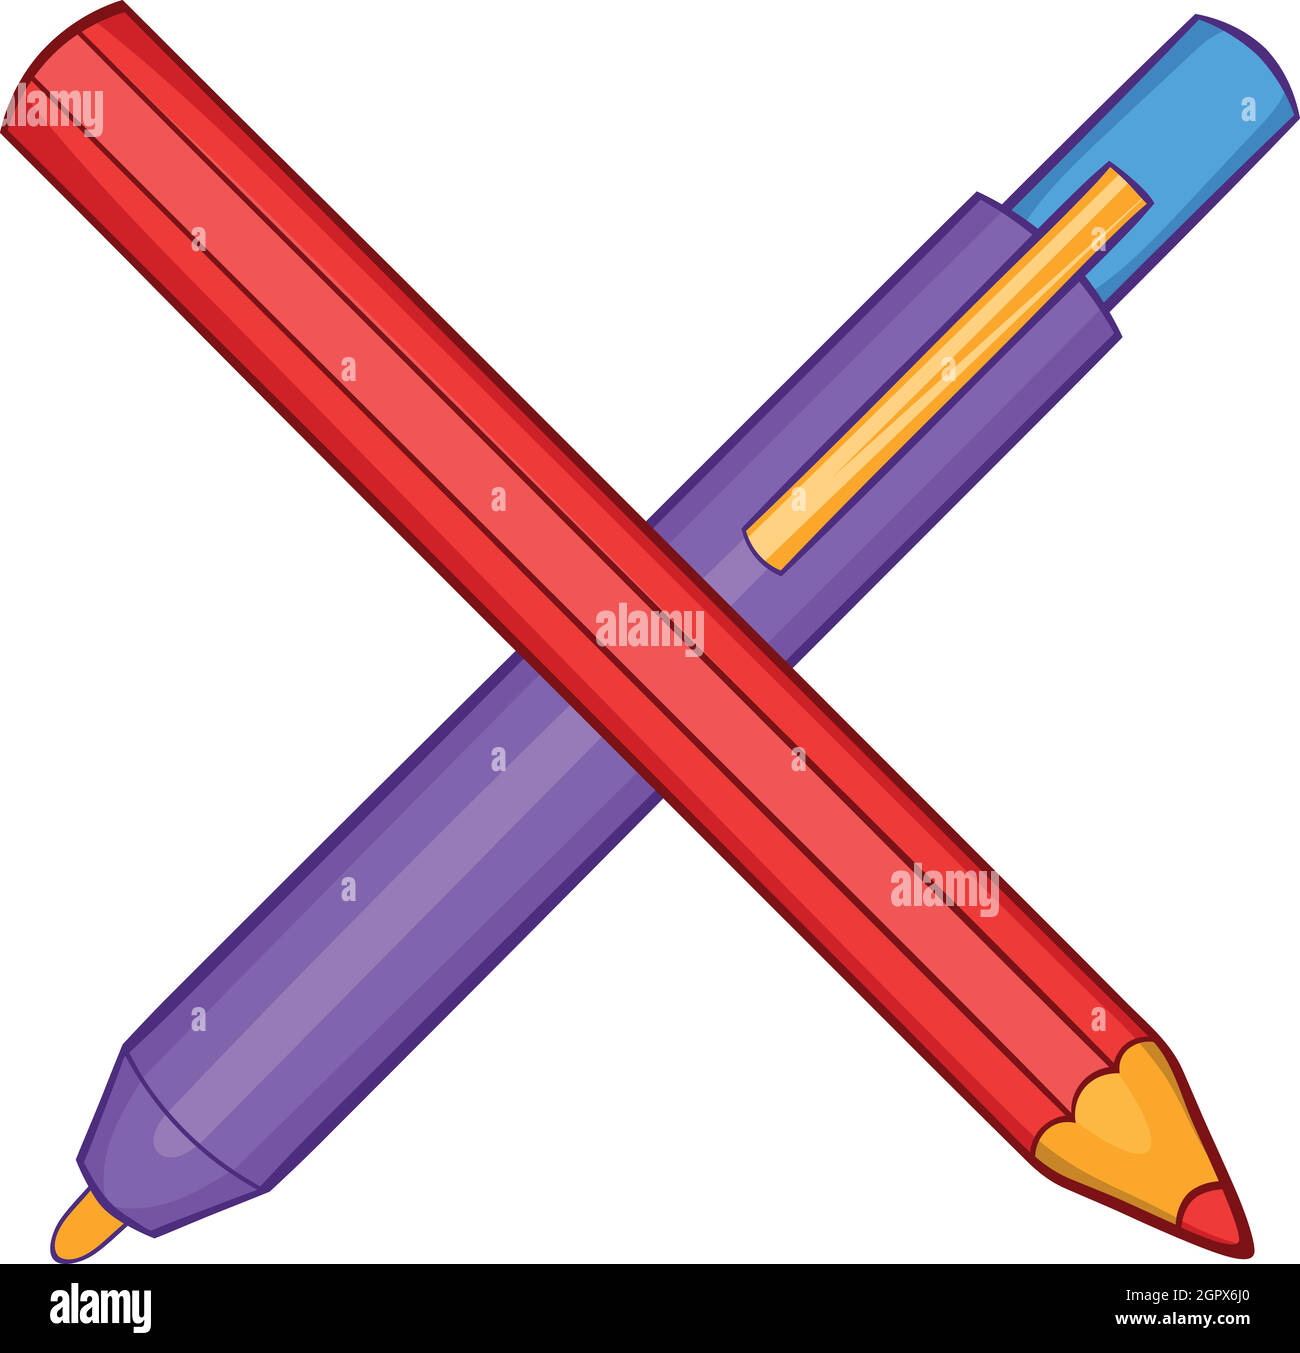 Pencil and pen icon in cartoon style Stock Vector